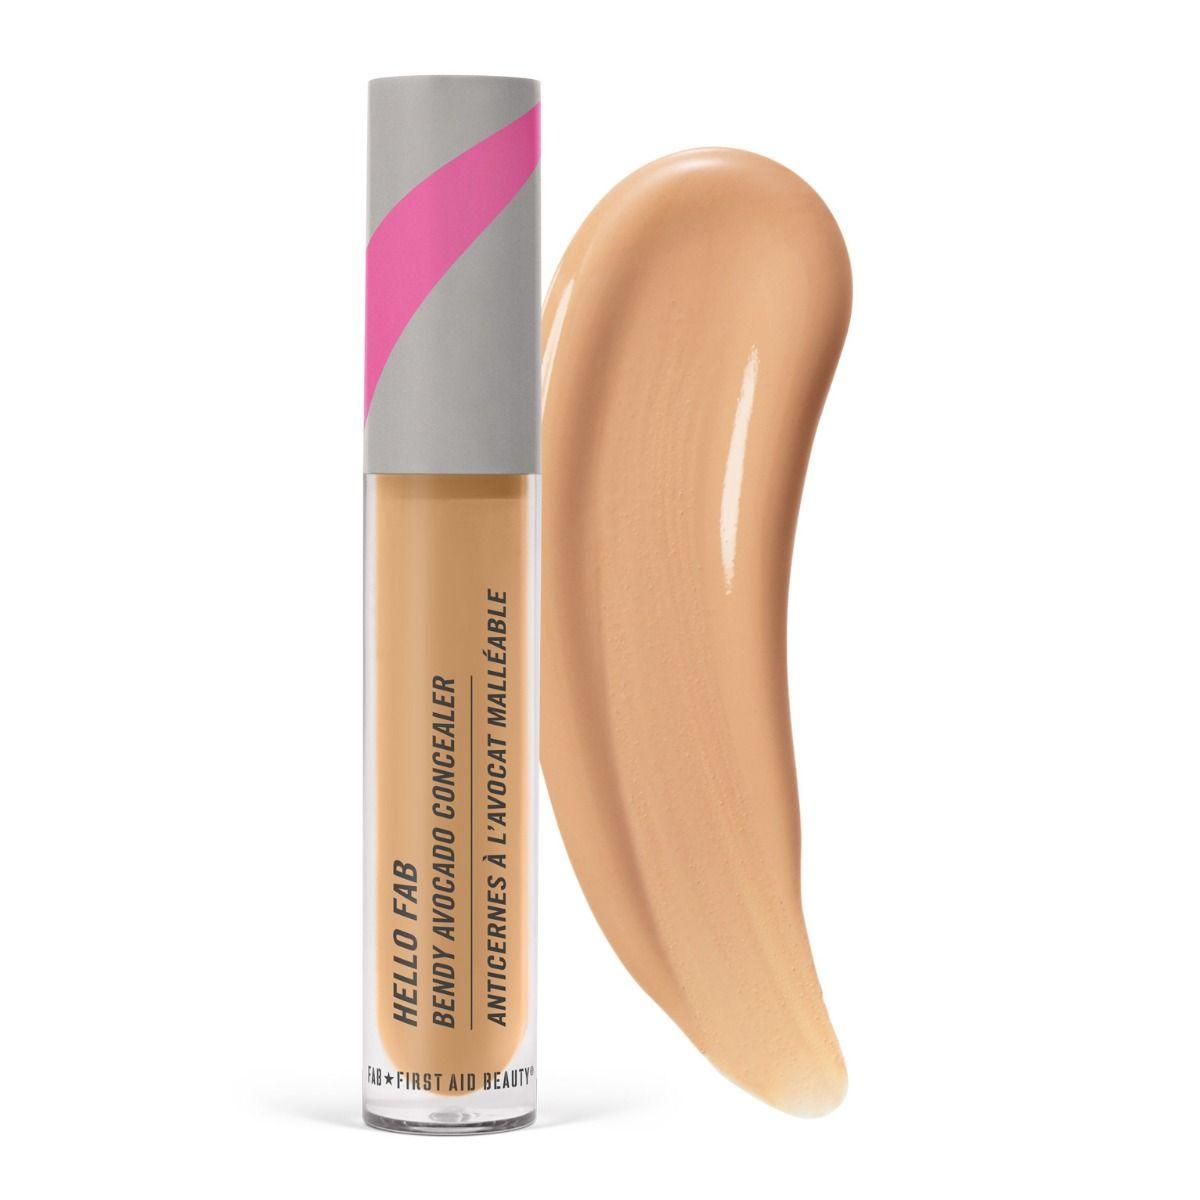 First Aid Beauty Hello FAB Bendy Avocado Concealer 3